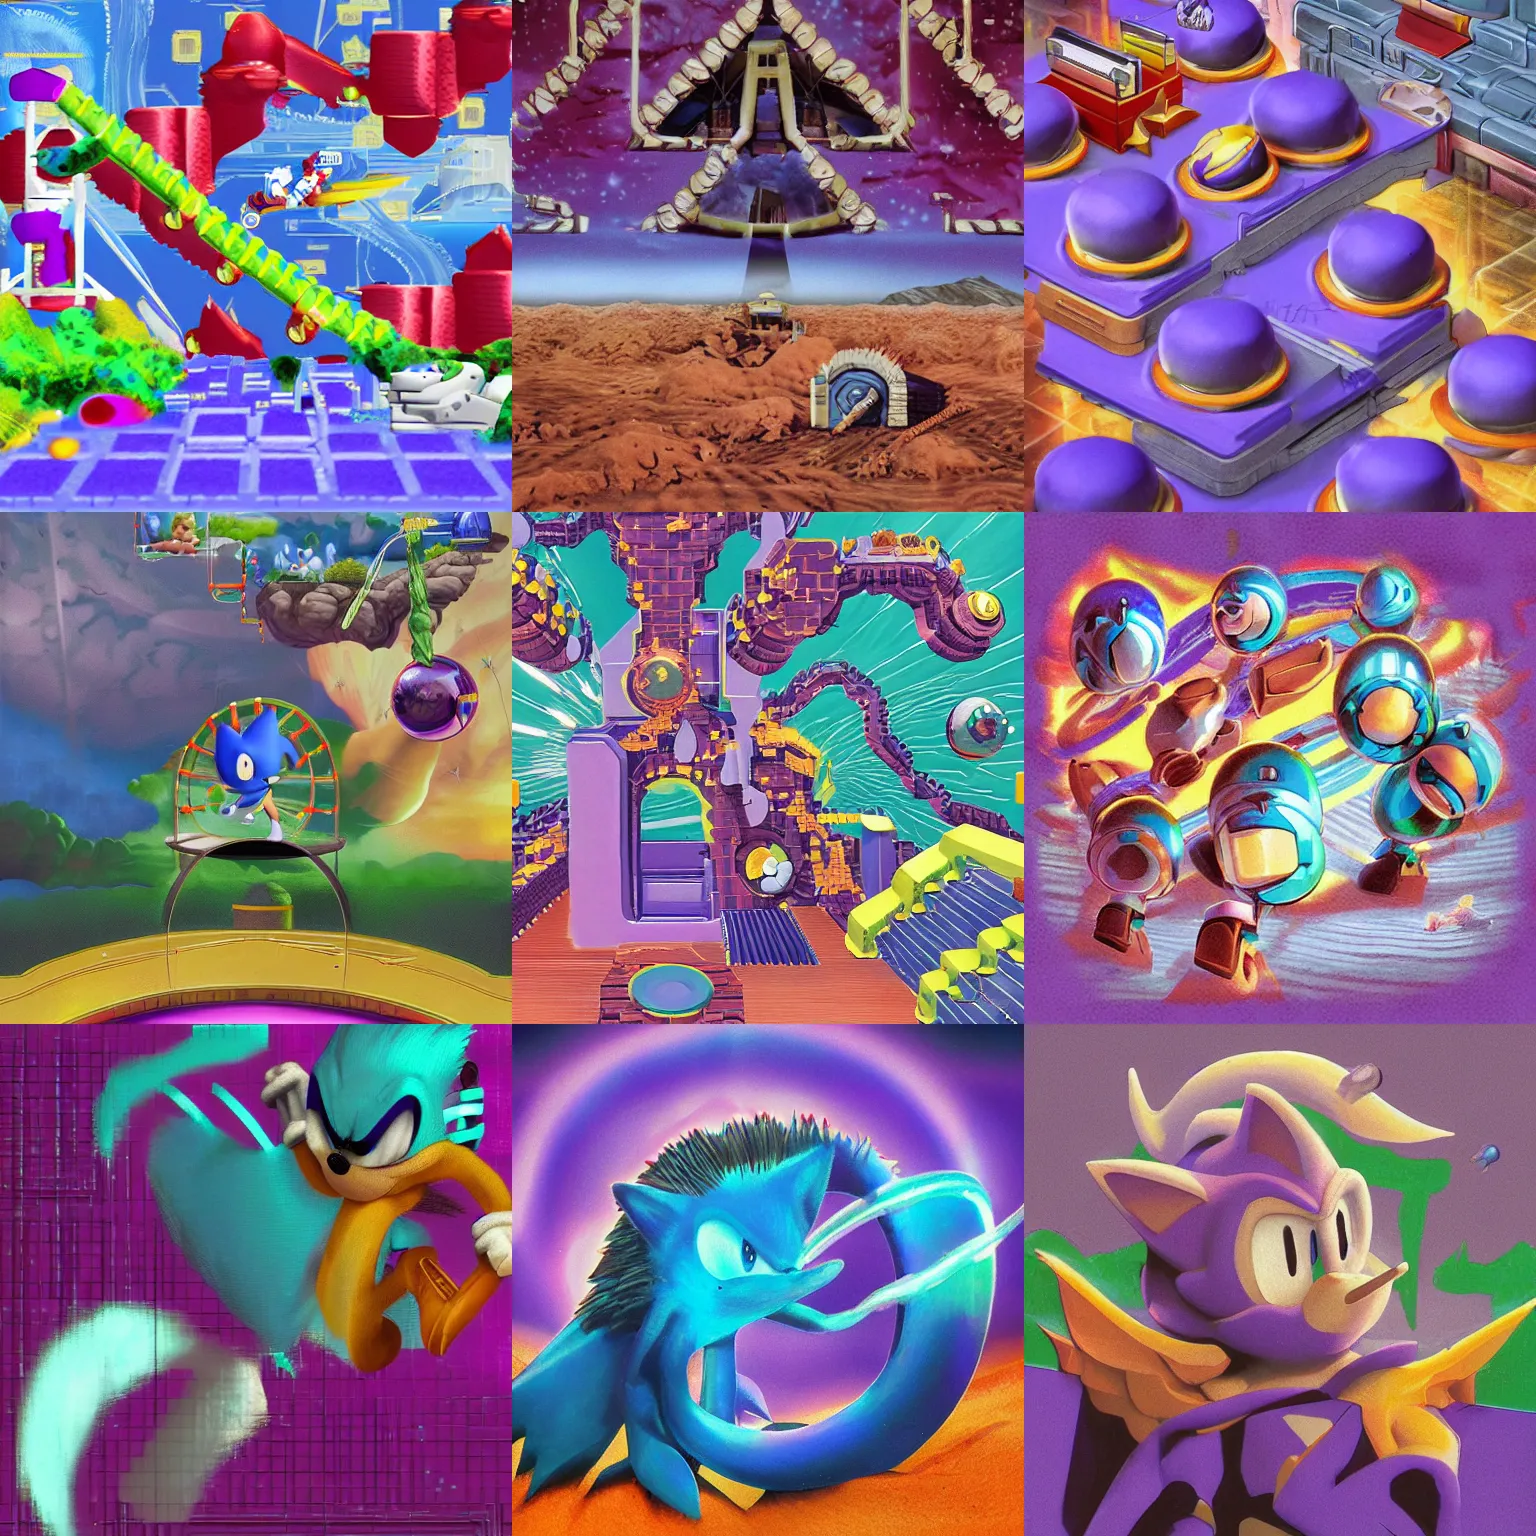 Prompt: sonic hedgehog portrait deconstructivist claymation scifi matte painting landscape of a surreal stars, retro moulded professional soft pastels high quality airbrush art album cover of a liquid dissolving airbrush art dreams sonic the hedgehog swimming through cyberspace purple teal checkerboard background 1 9 9 0 s 1 9 9 2 sega genesis rareware video game album cover